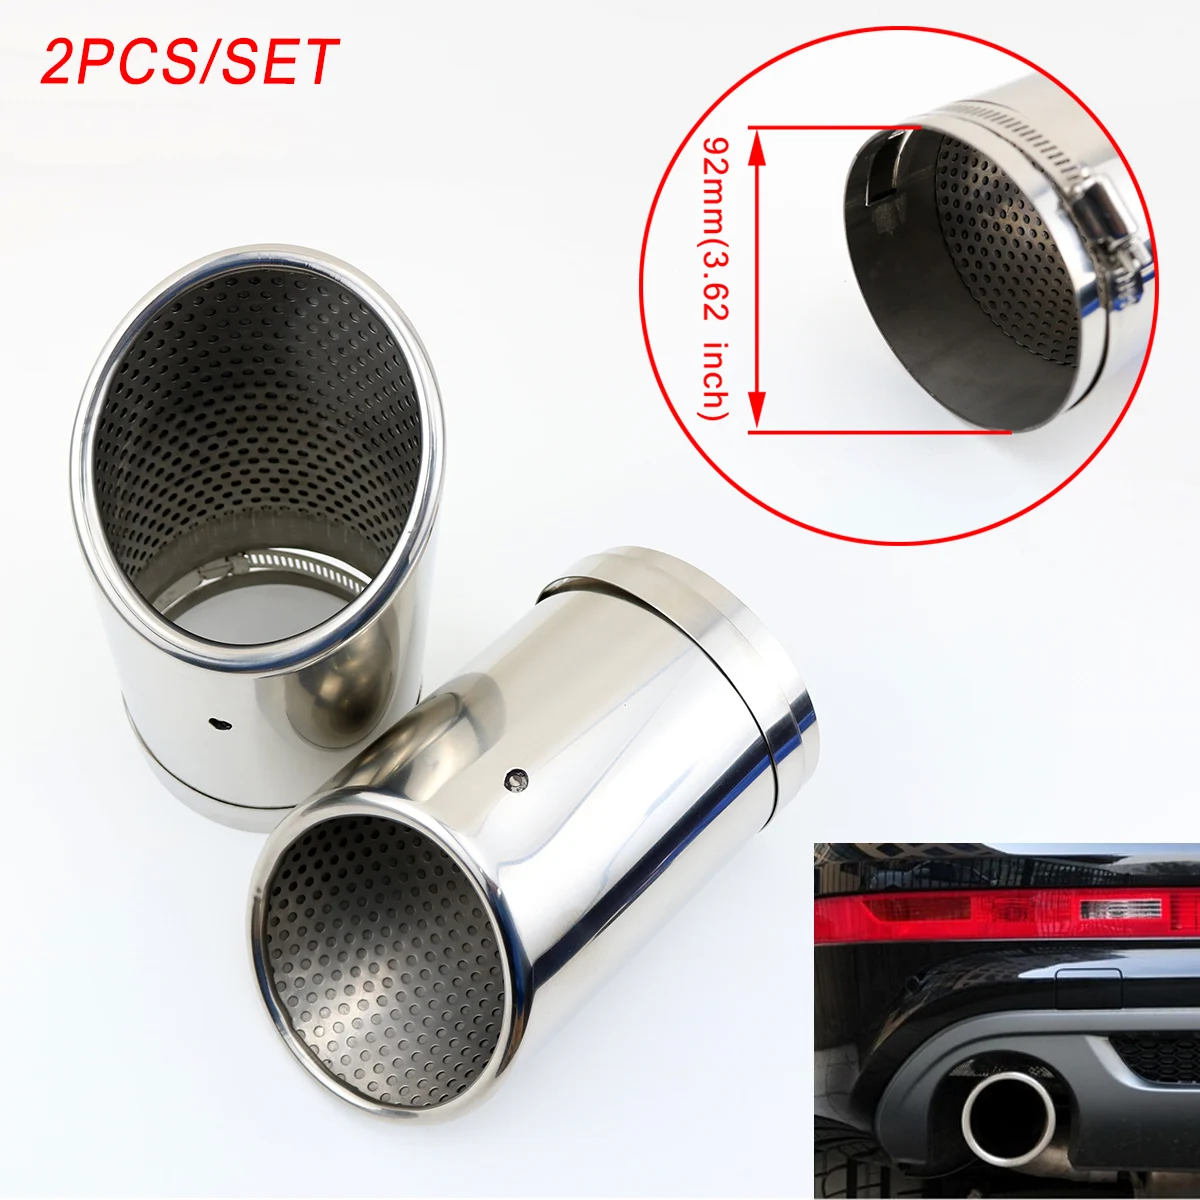 Rear Tailpipe Cover Fit  For Audi A8 Q7 3.0T 2009-2015 Accessories Tail Muffler Pipe Tip Exhaust Silencer Trim Stainless Steel